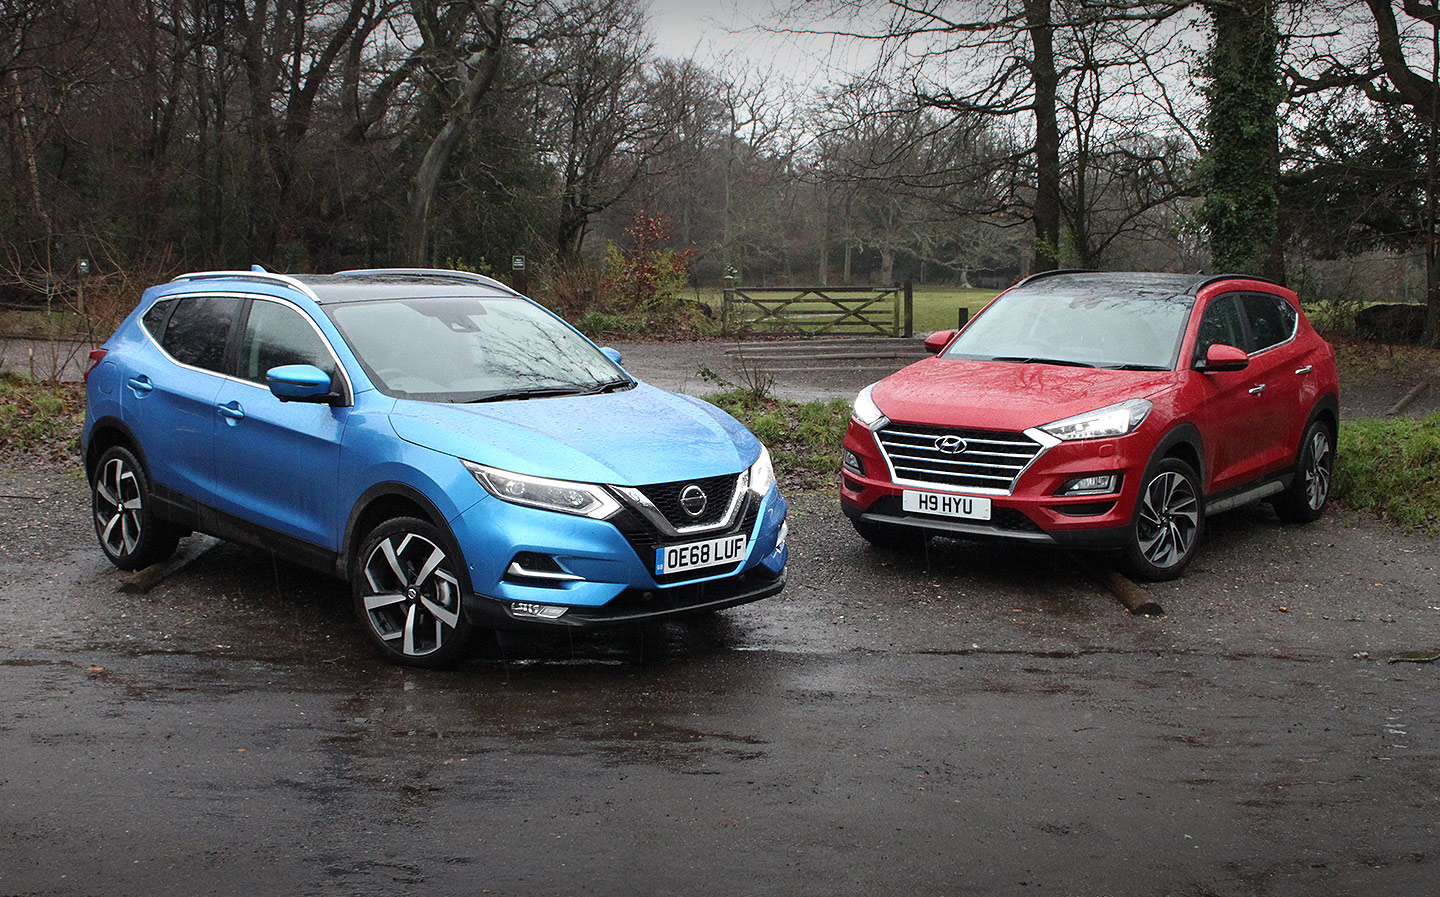 Hyundai Tucson vs Nissan Qashqai comparison review srossover SUV twin test by Will Dron and james Allen for Sunday Times driving.co.uk